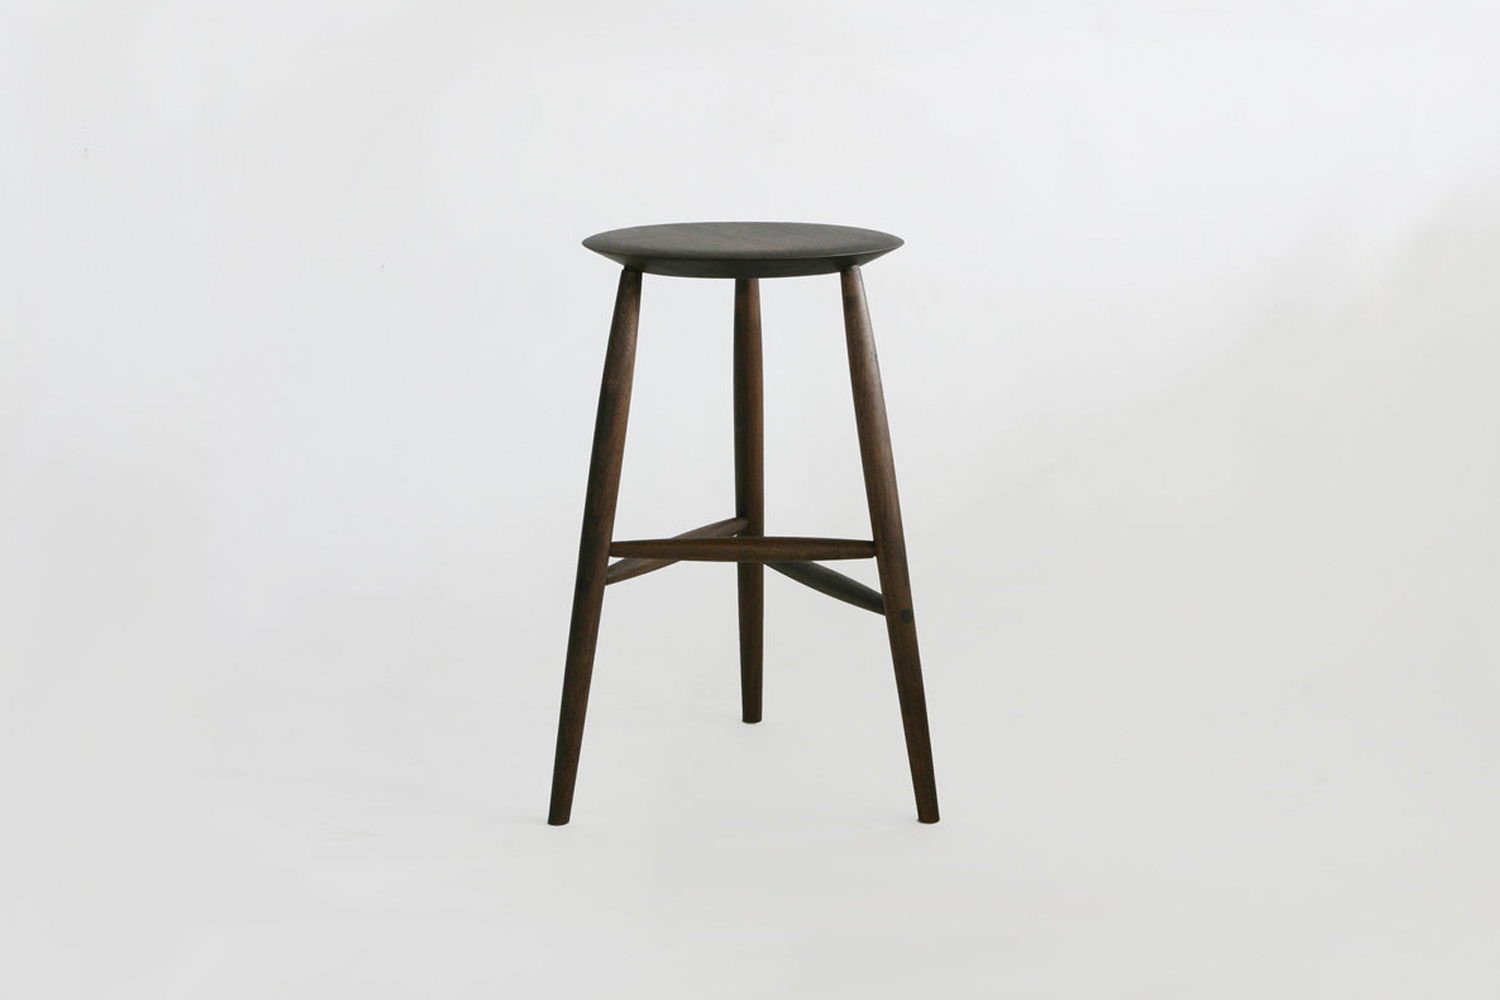 for a similar slender counter stool, the sawkille co. tall stool in american bl 23